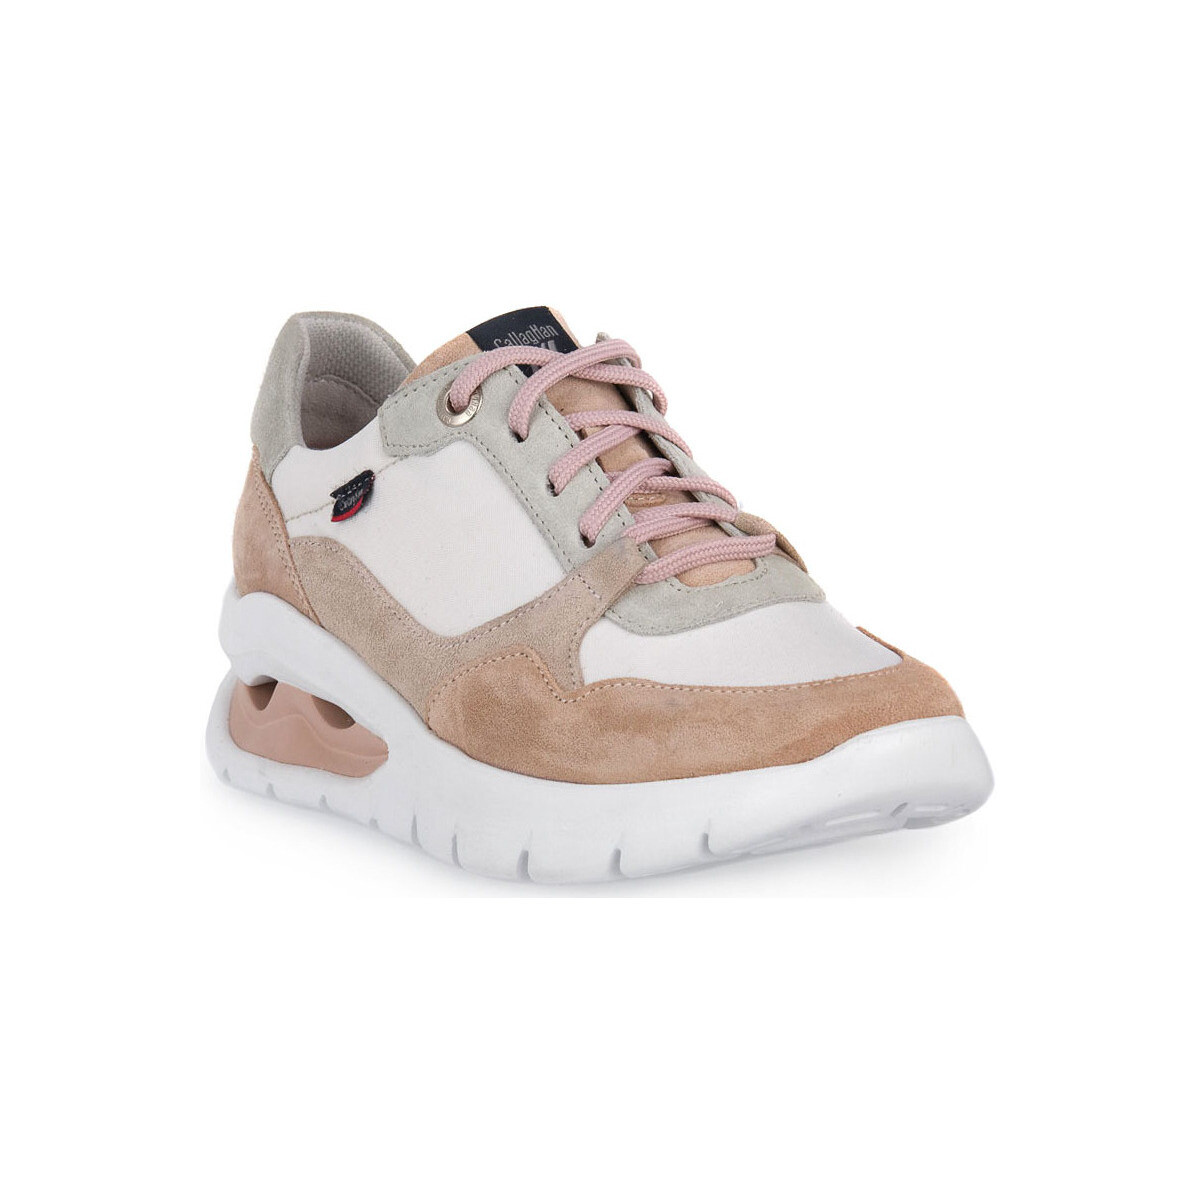 Zapatos Mujer Multideporte CallagHan PESCA PINK ARIA Rosa